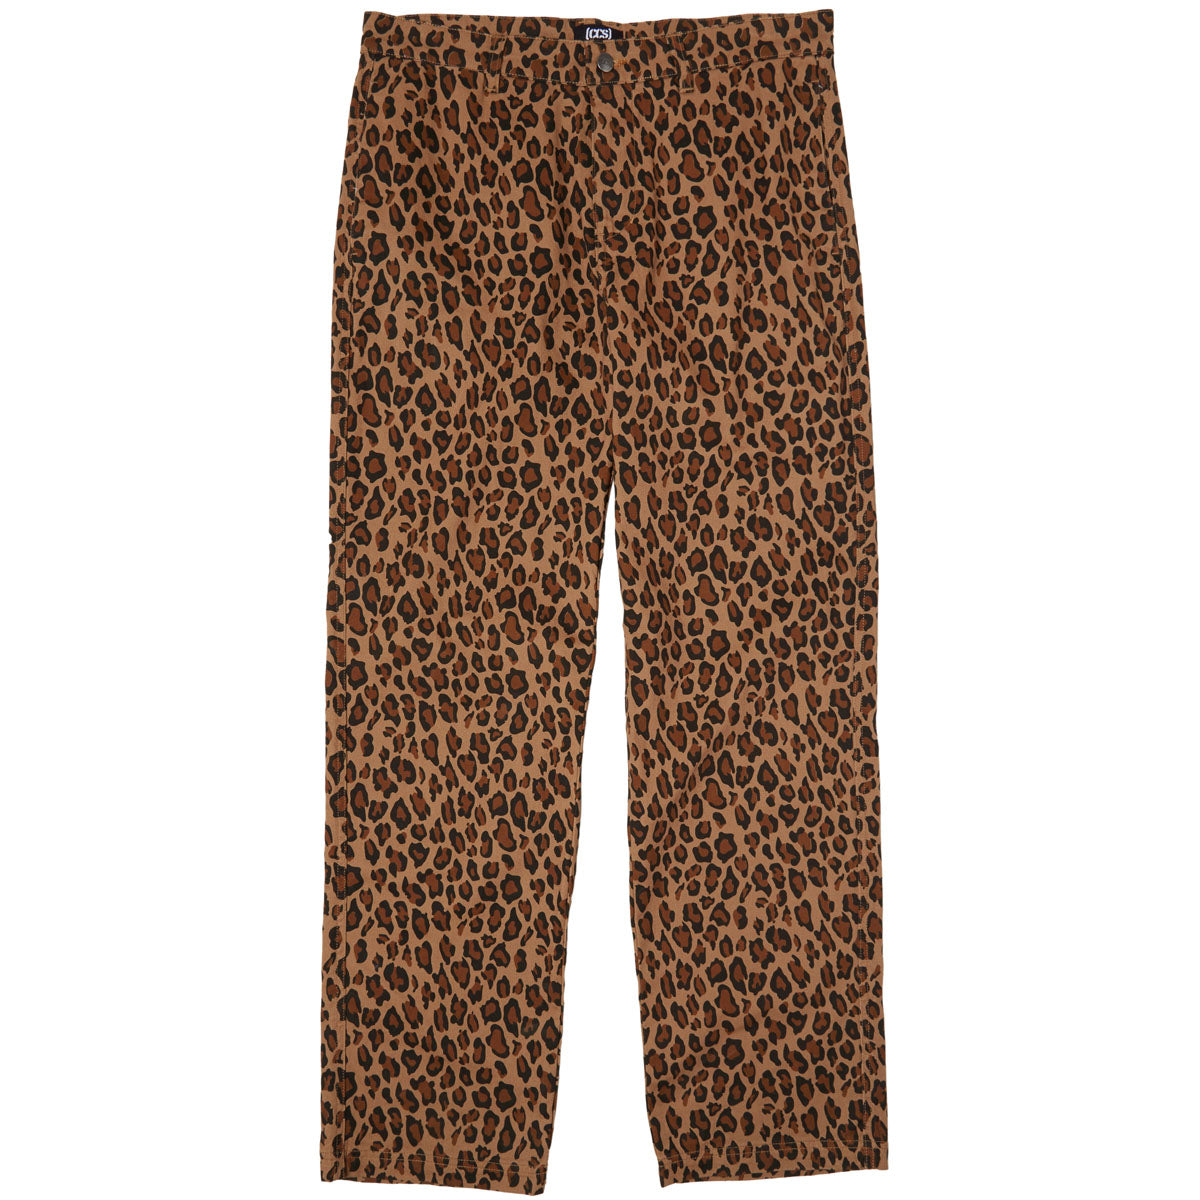 CCS Original Relaxed Chino Pants - Leopard image 5